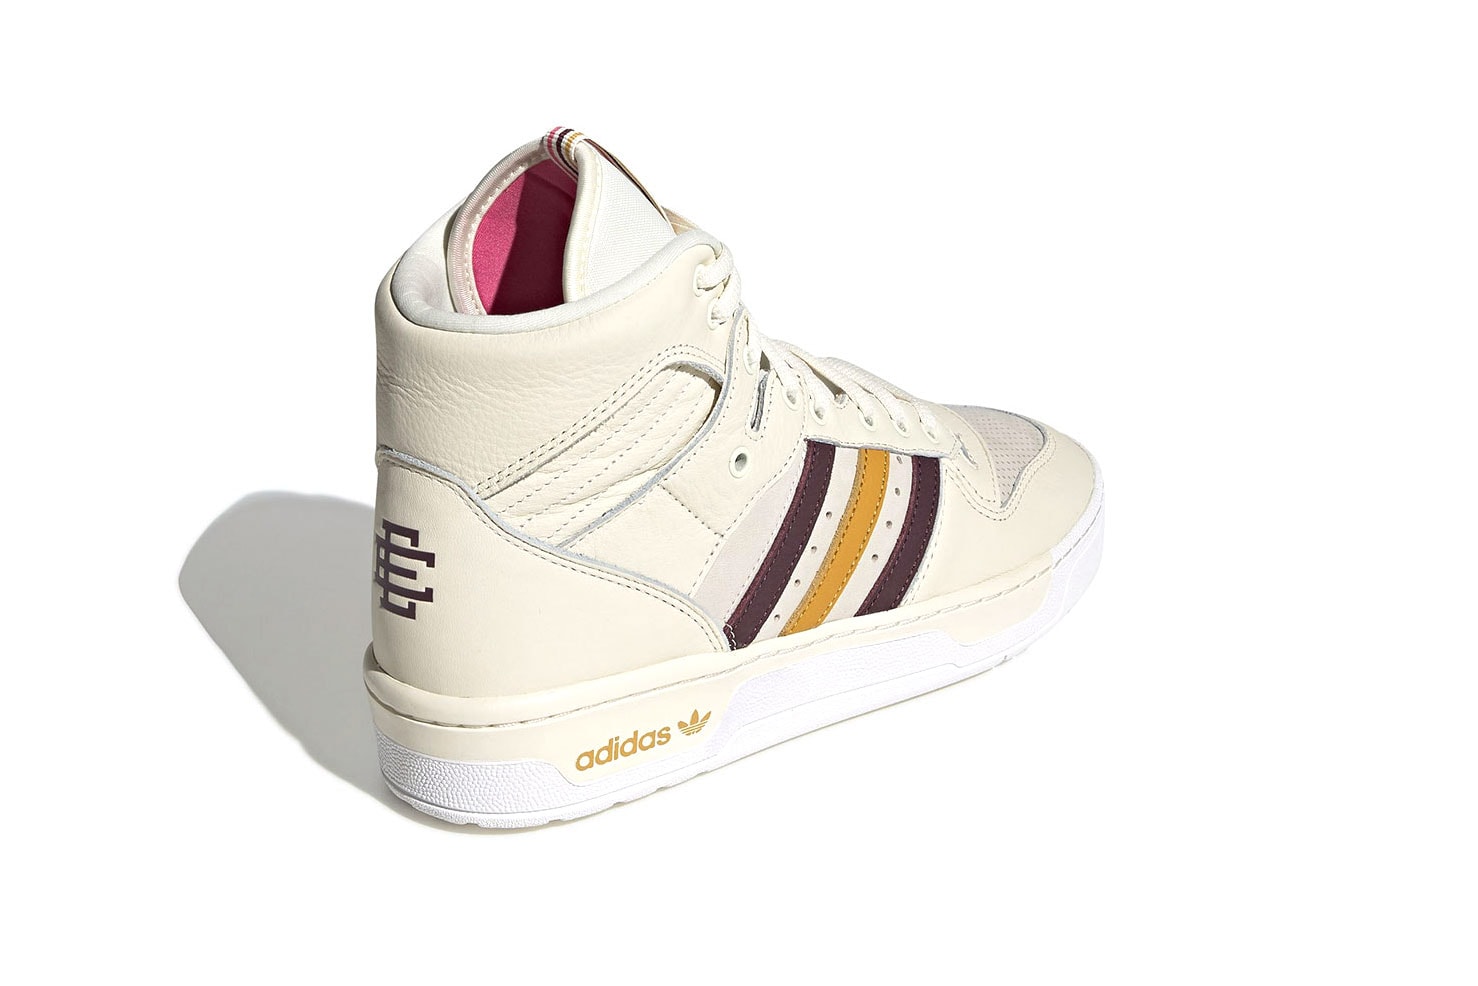 eric emanuel x adidas Rivalry Hi "Crystal White/Bold Gold" Release Date info price colorway sneaker december 2018 Color: Crystal White/Night Red/Real Pink/Bold Gold Style Code: G25836